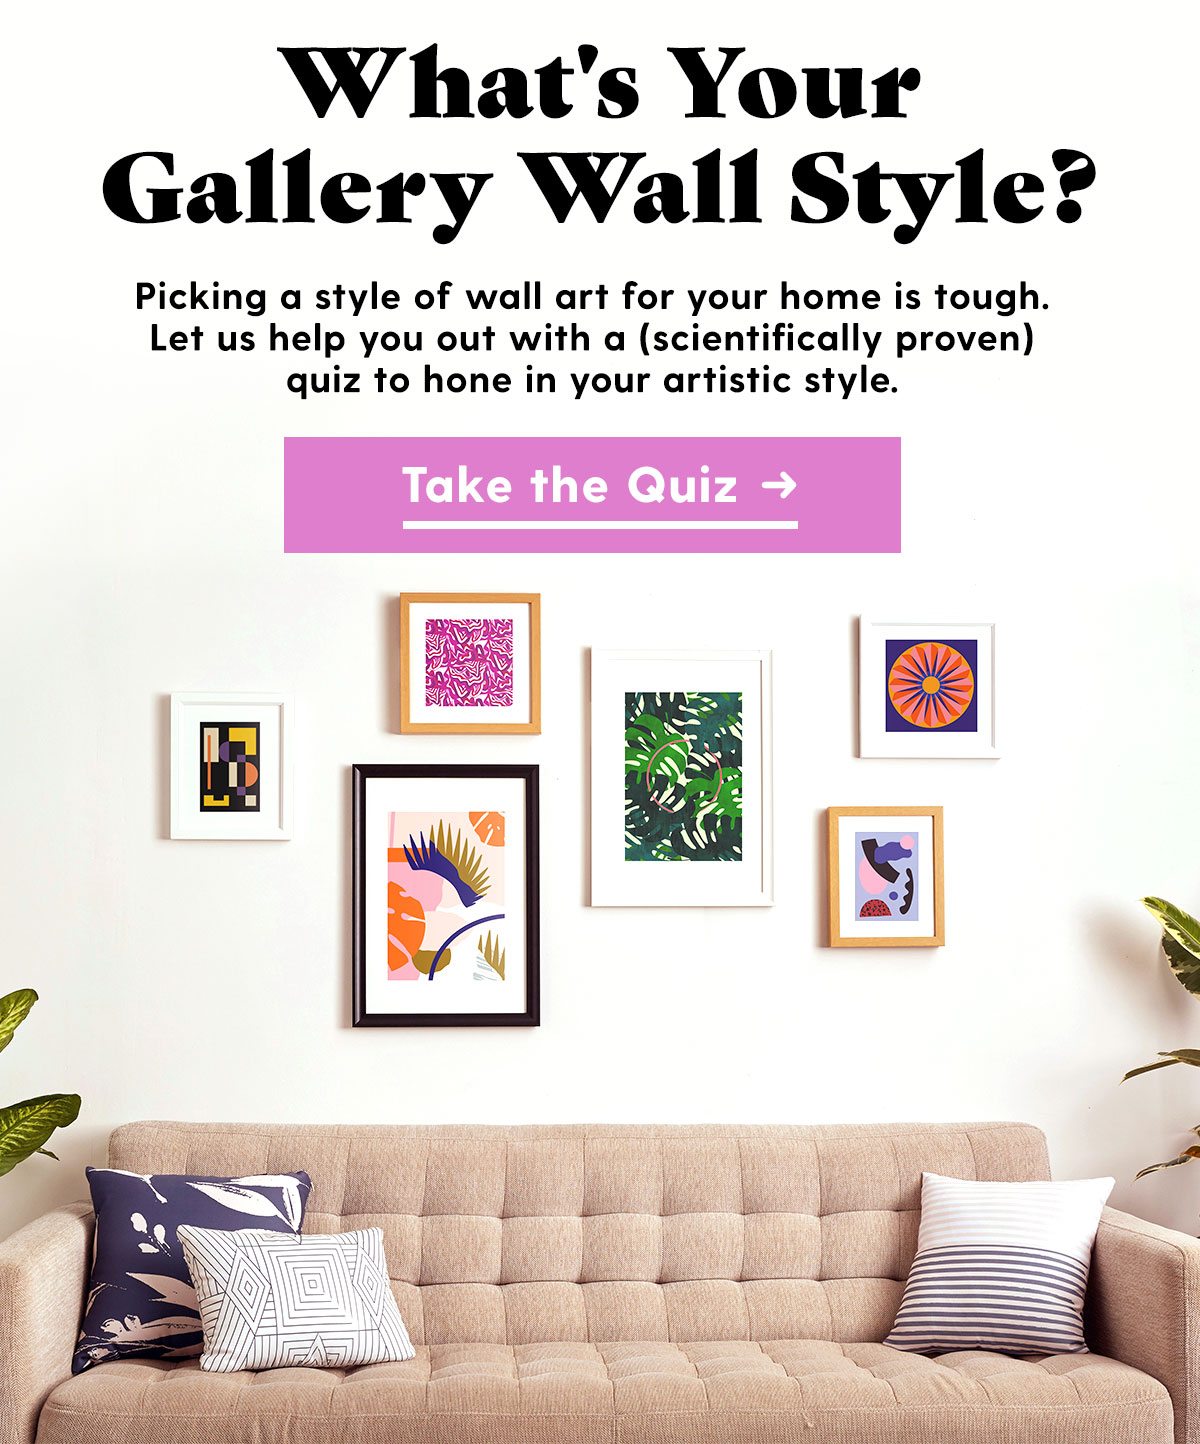 What's Your Gallery Wall Style?